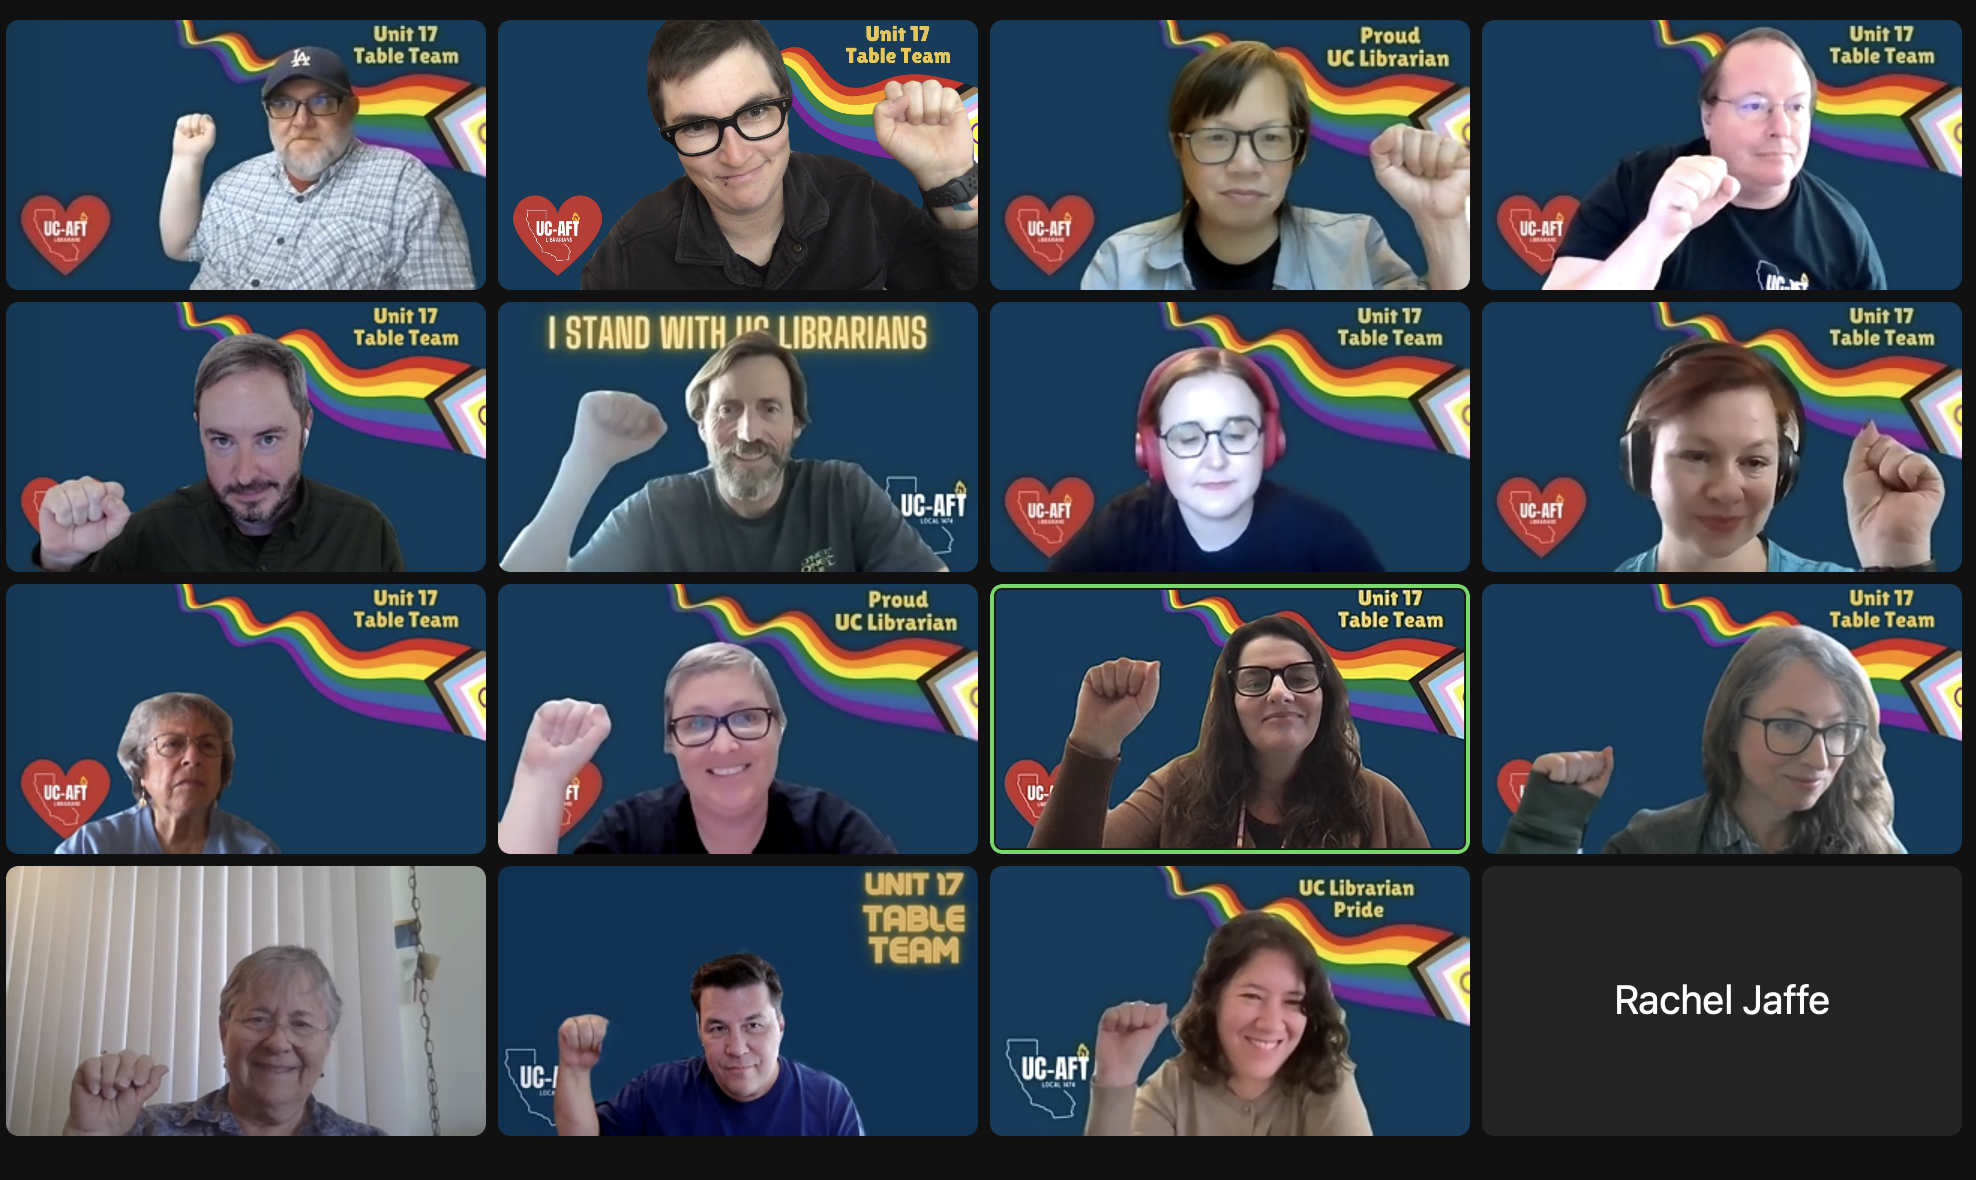 This image is a screenshot of a Zoom meeting featuring sixteen participants arranged in a grid of four rows and four columns. Each participant has a virtual background with a blue backdrop, a rainbow pattern, and various phrases indicating support for UC librarians, such as "Unit 17 Table Team," "Proud UC Librarian," and "I Stand with UC Librarians." Many of the participants are holding up a fist, demonstrating solidarity.